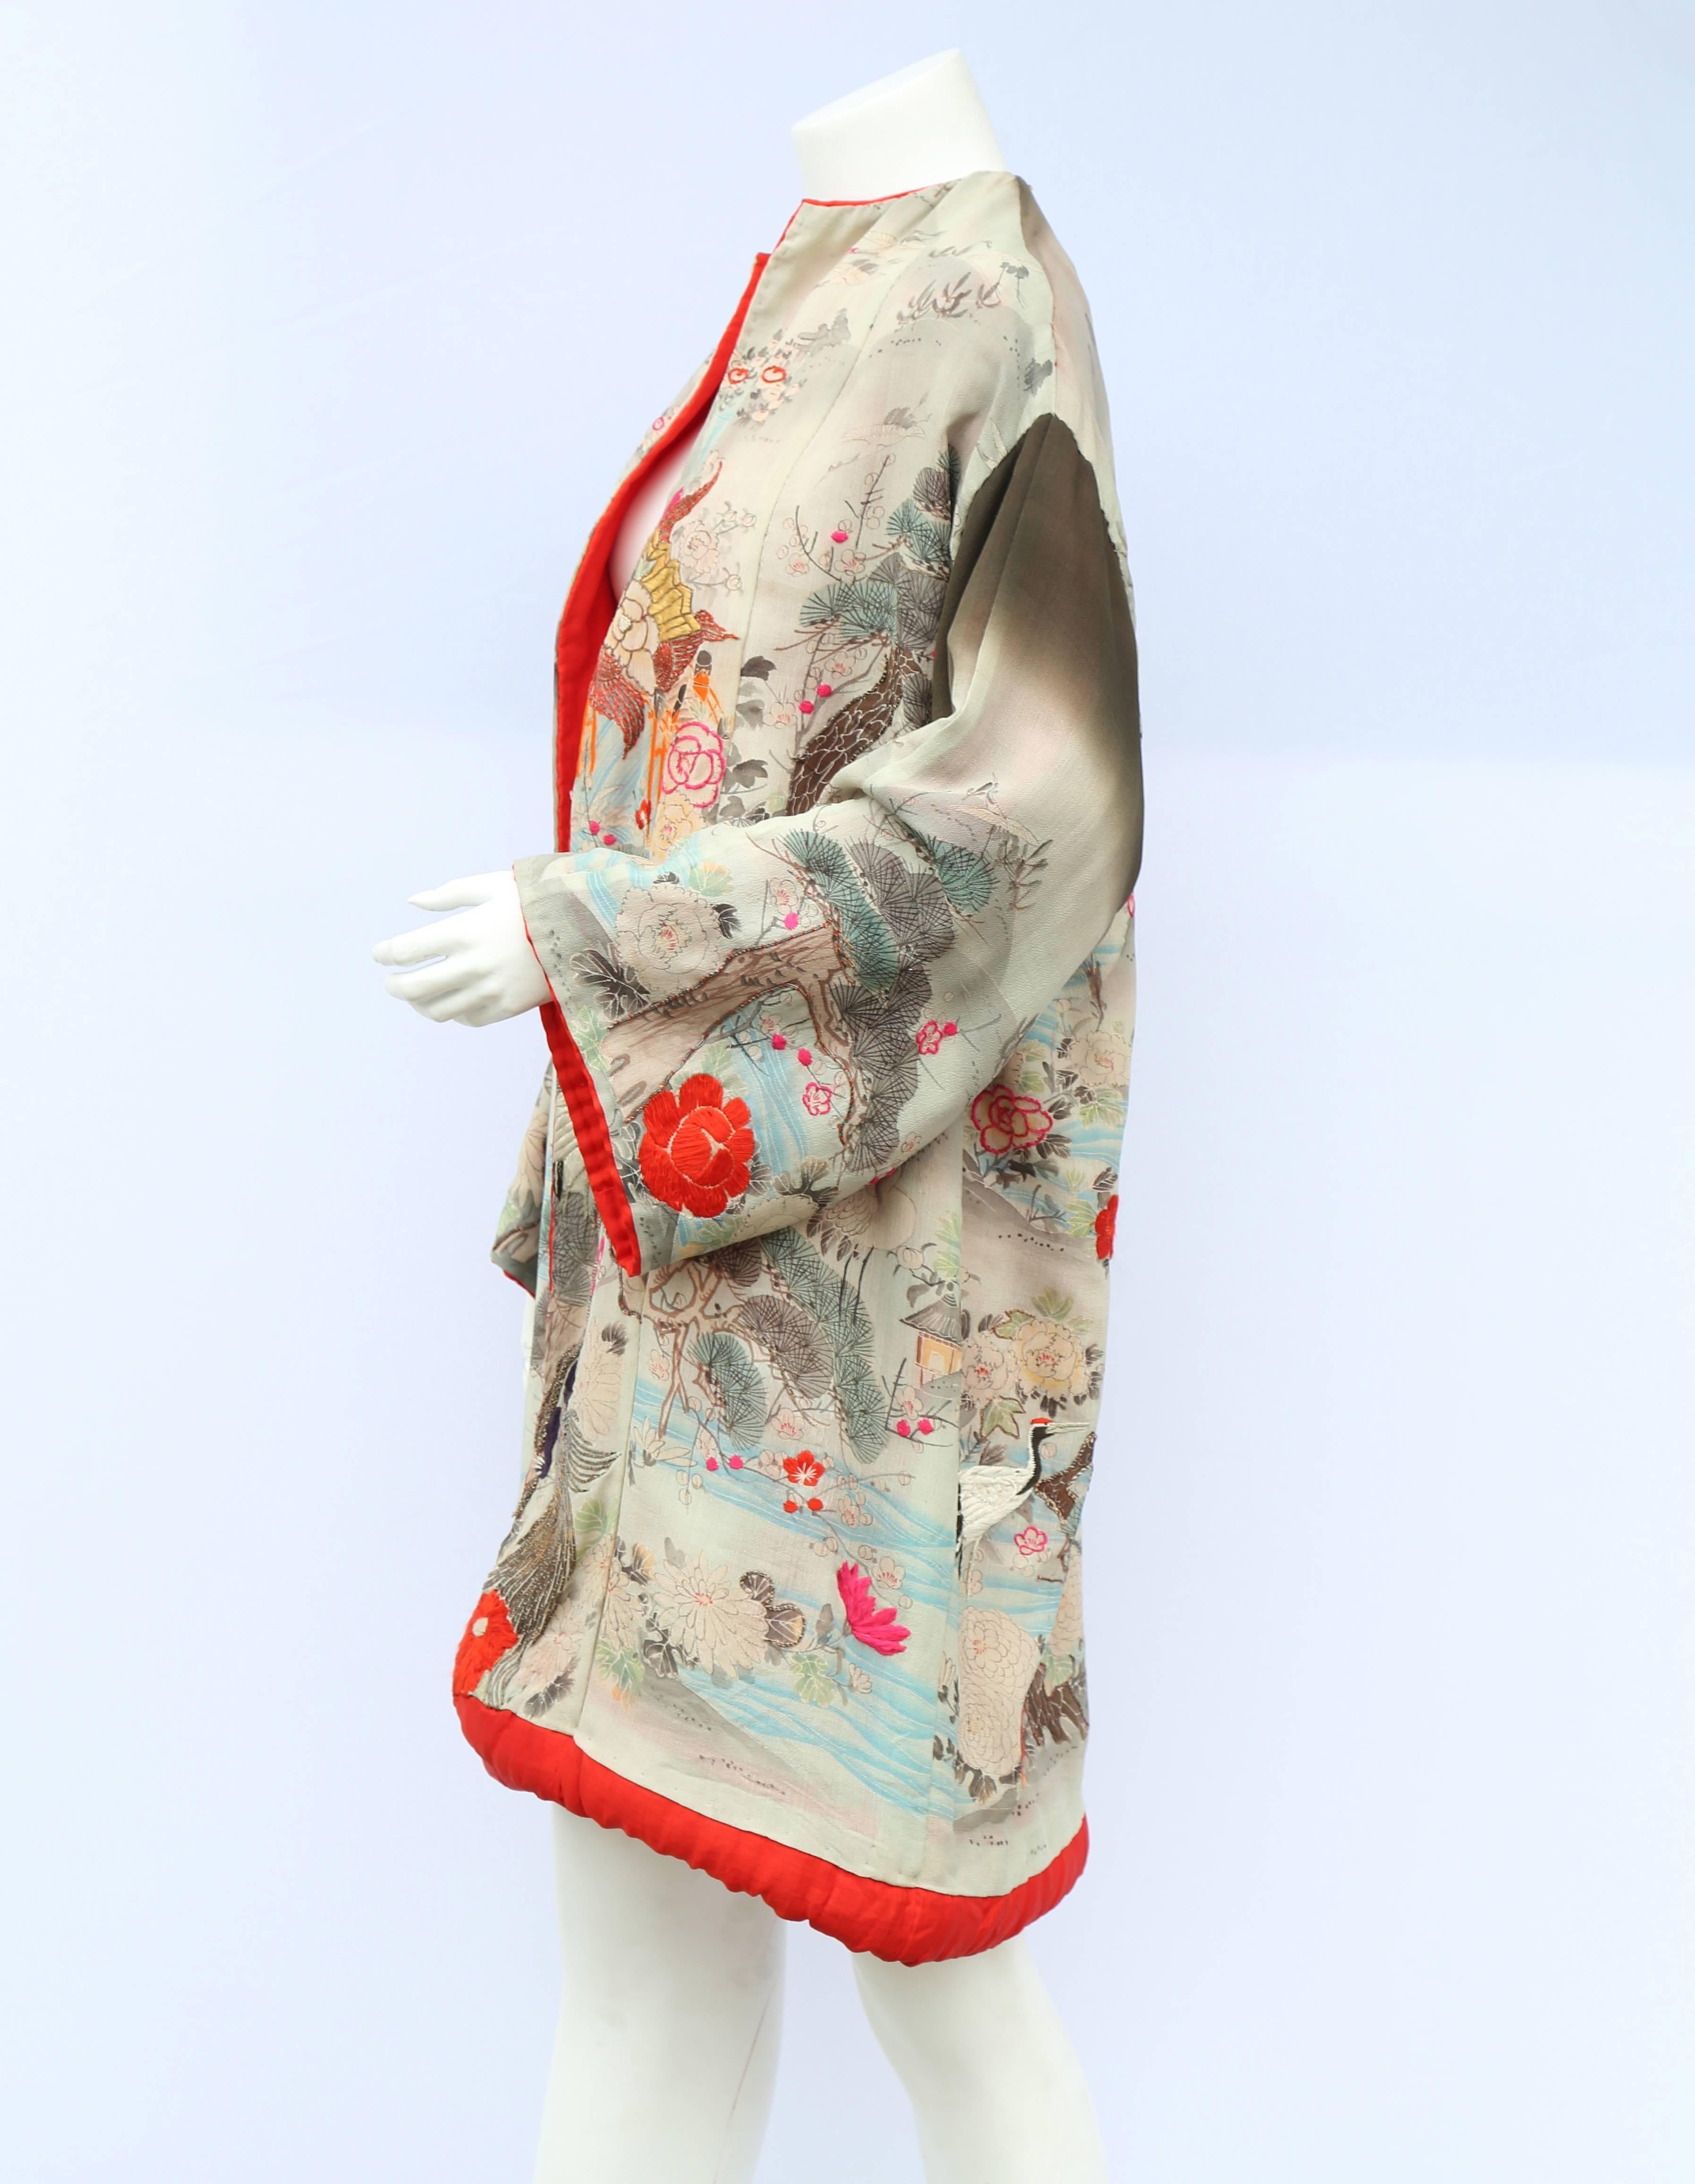 A vintage 1920s printed water colour silk kimono with bright red lining and embroidery throughout 

Measurements taken flat in inches
Bust – 26
Waist – 26
Hips - 26
Length – 36
Sleeve length – 18 
Sleeve circumference 20 inches
